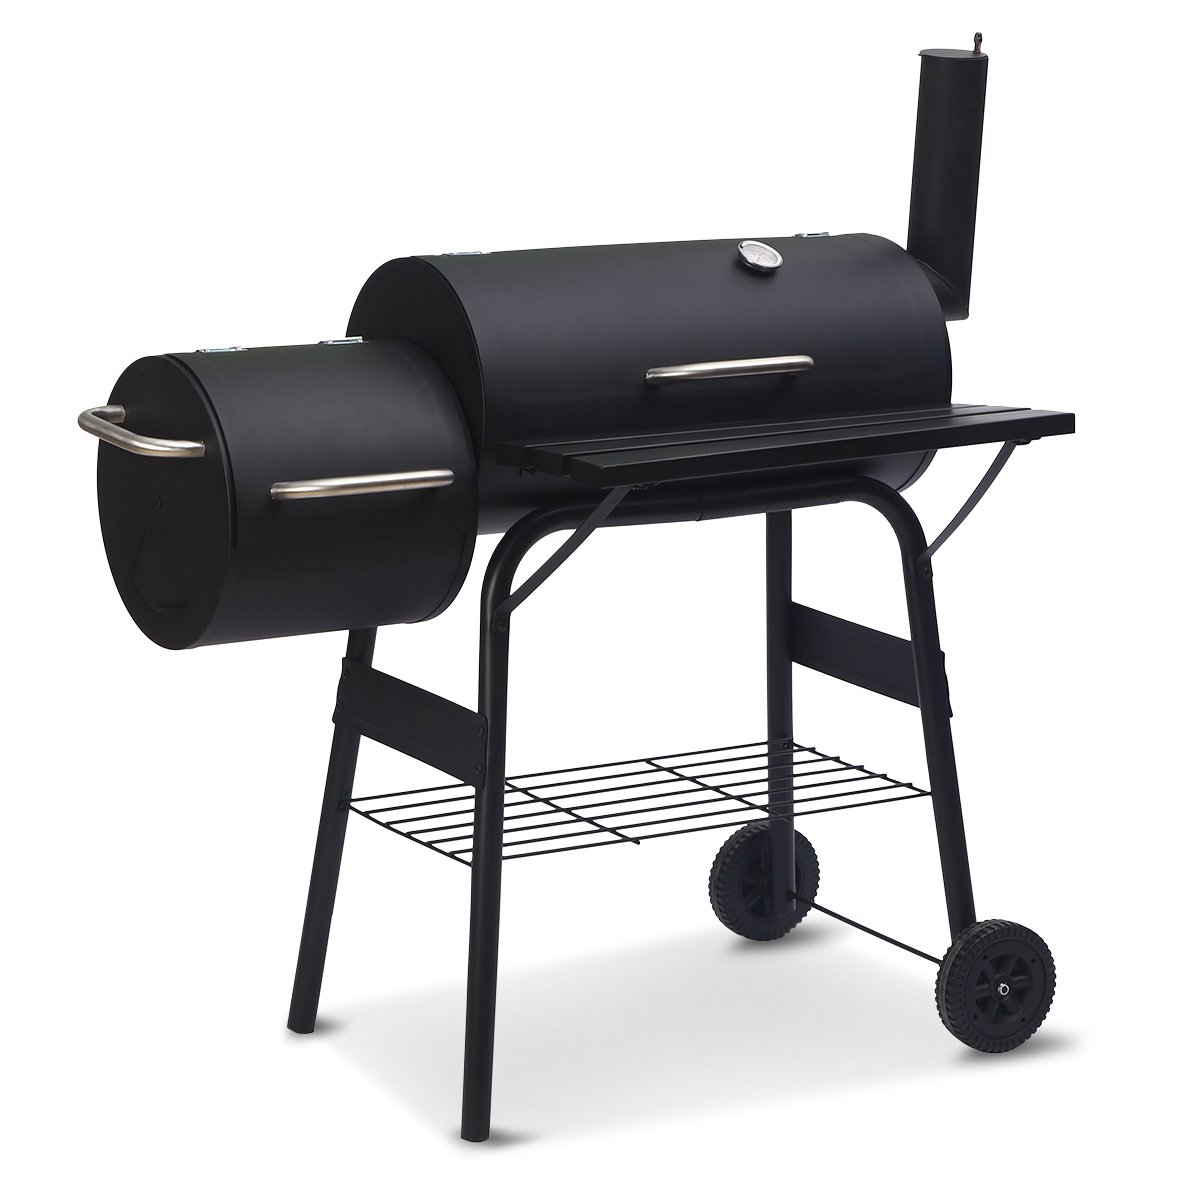 Wallaroo 2-in-1 Outdoor Barbecue Grill & Offset Smoker 2